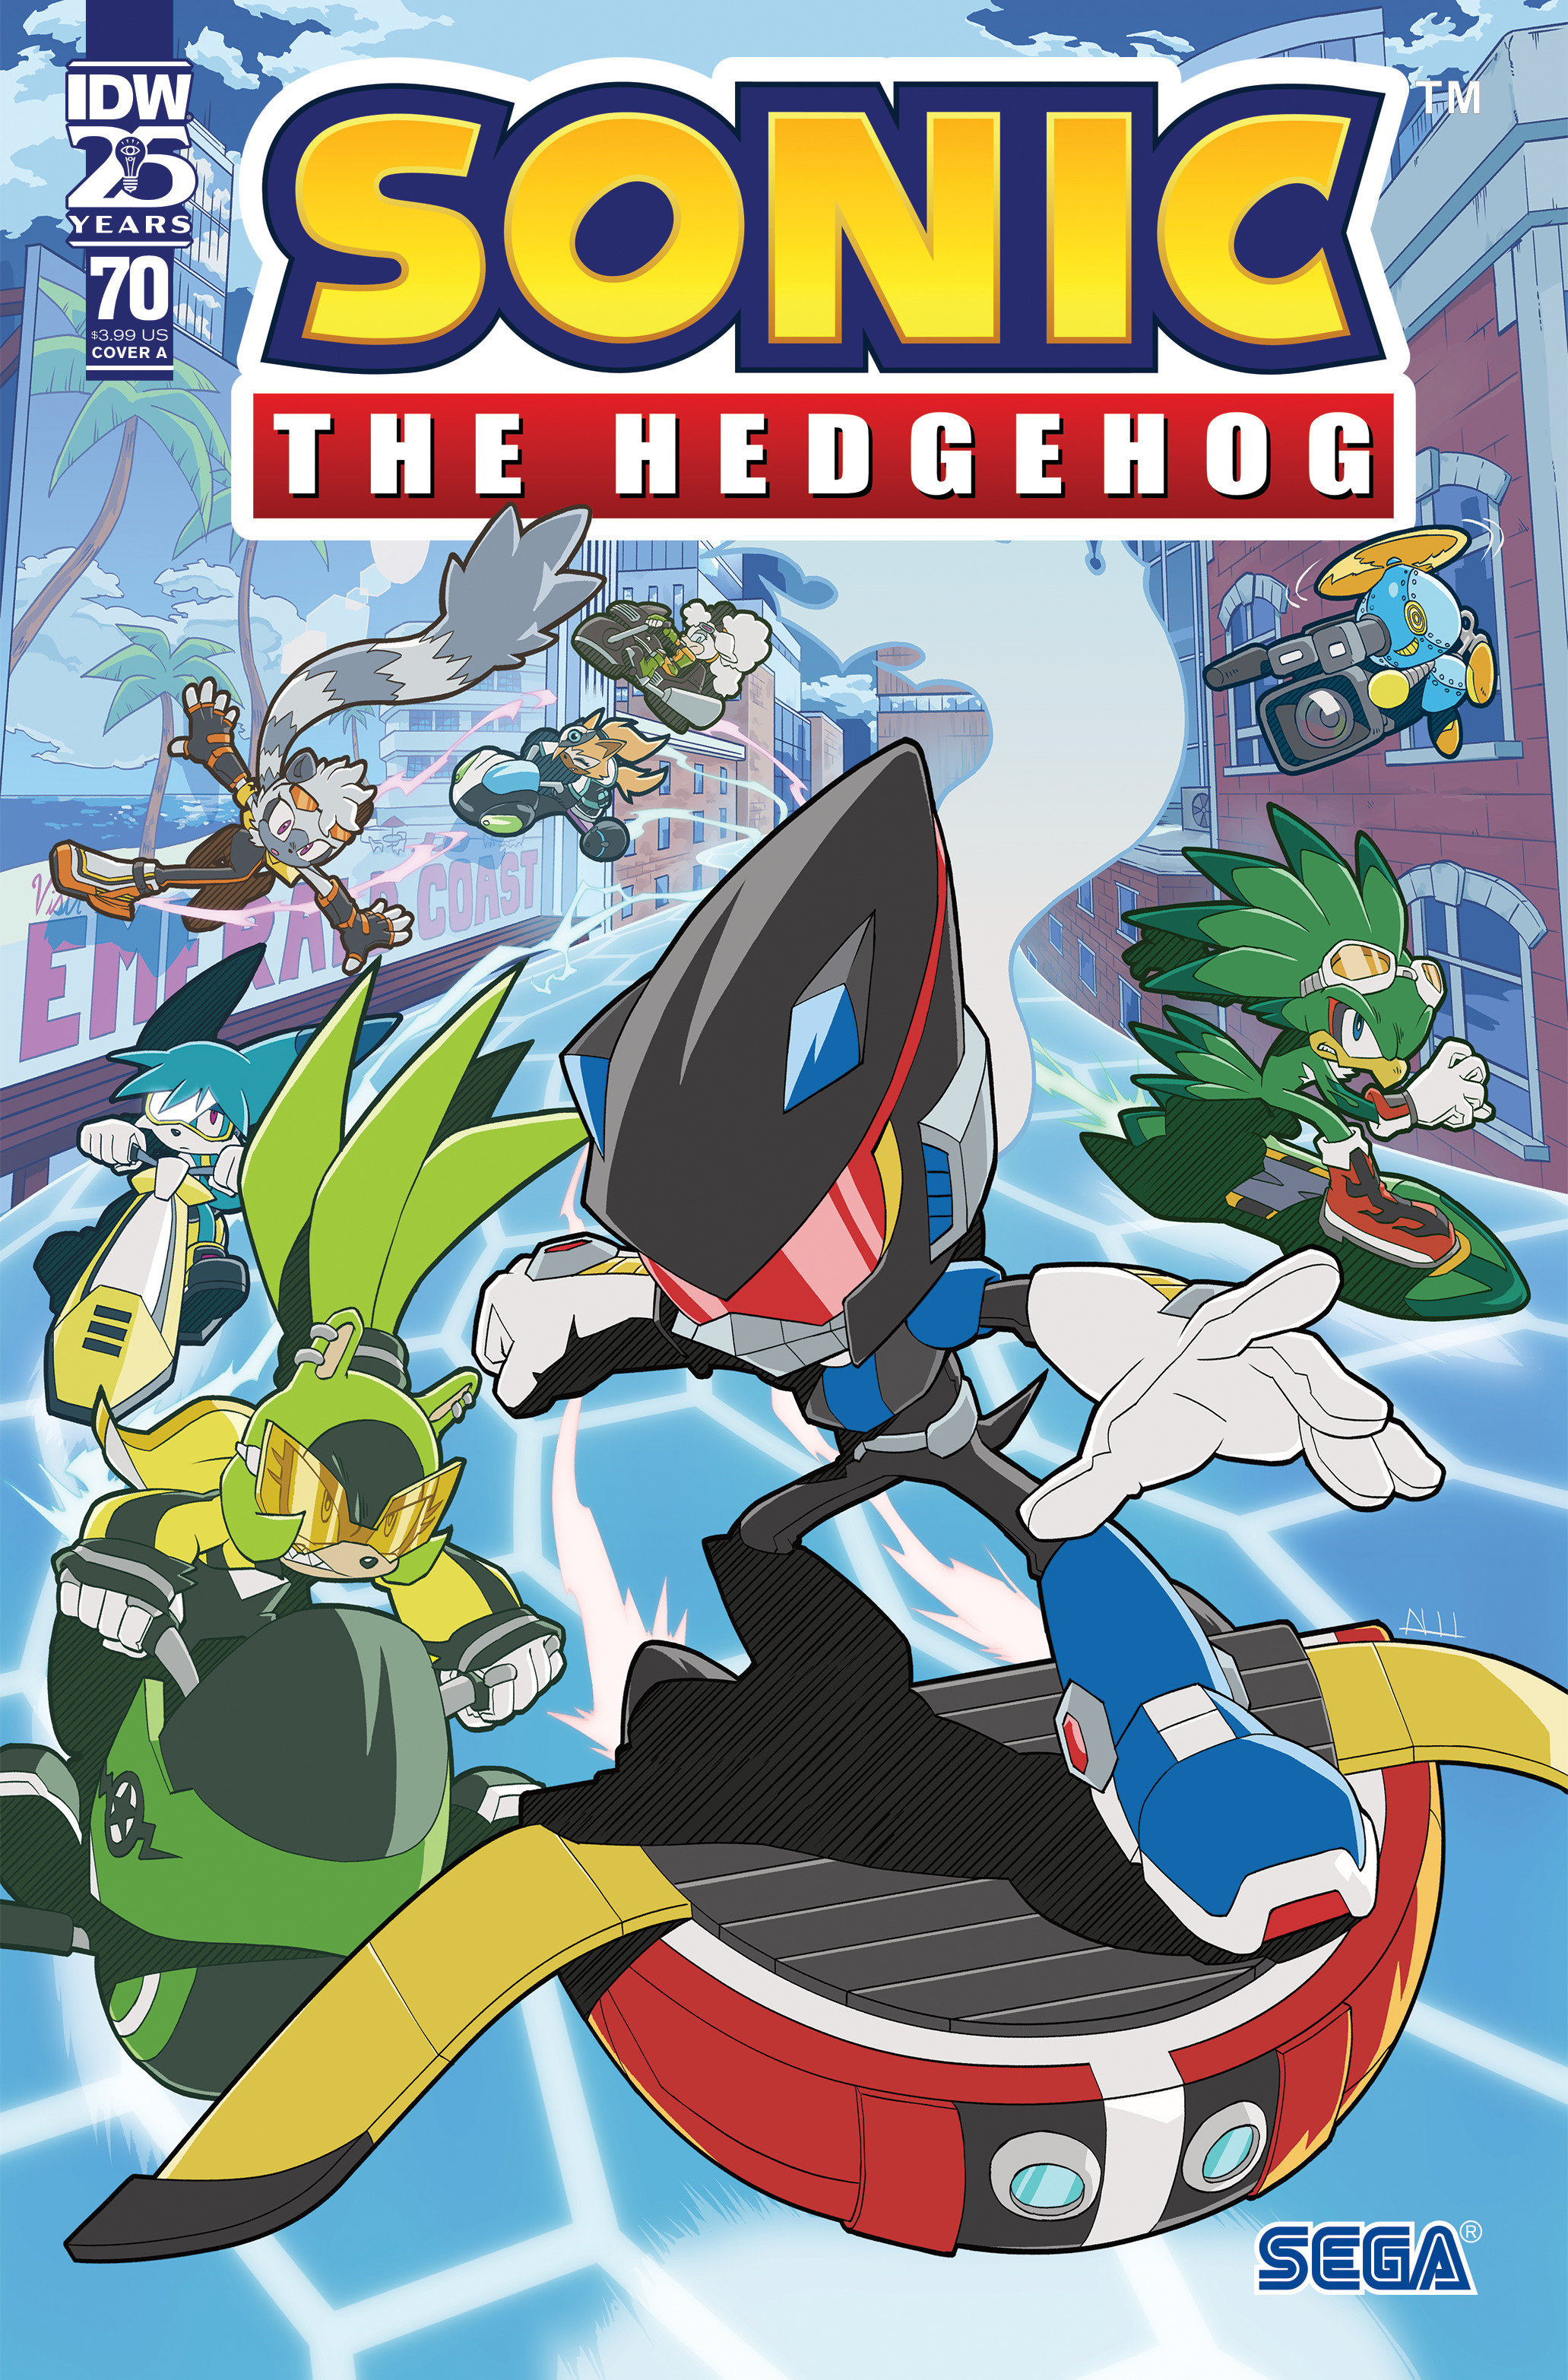 Sonic the Hedgehog #70 Cover A Hammerstrom